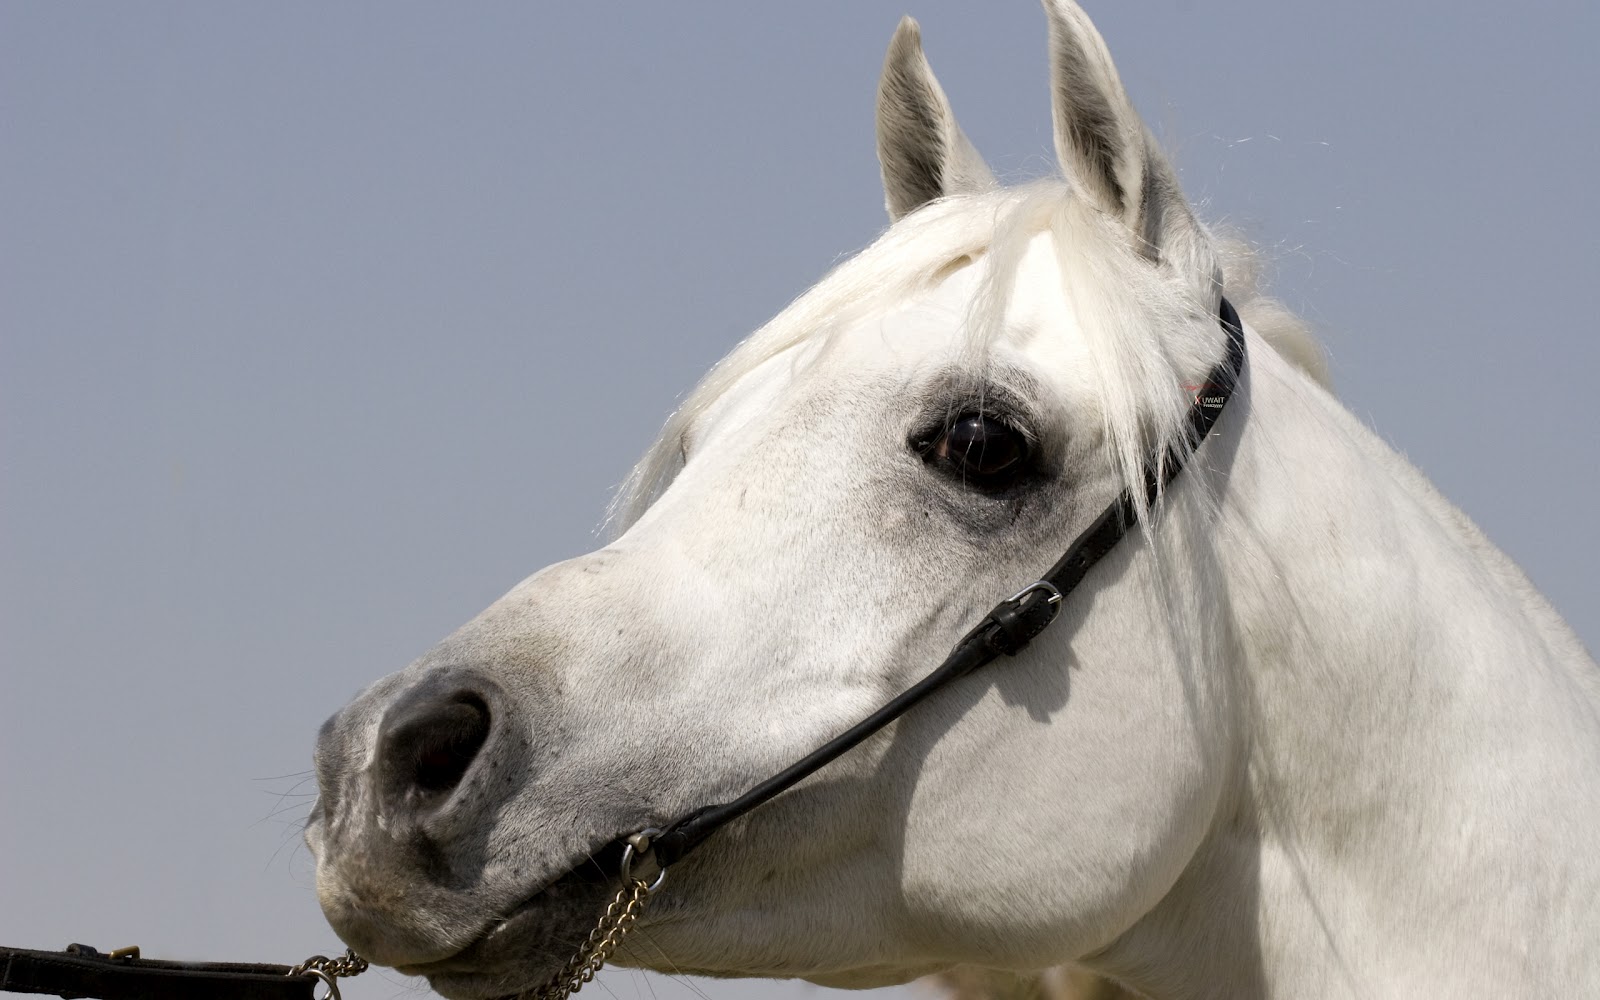  portrait picture of a white horse HD horses wallpapers   backgrounds 1600x1000